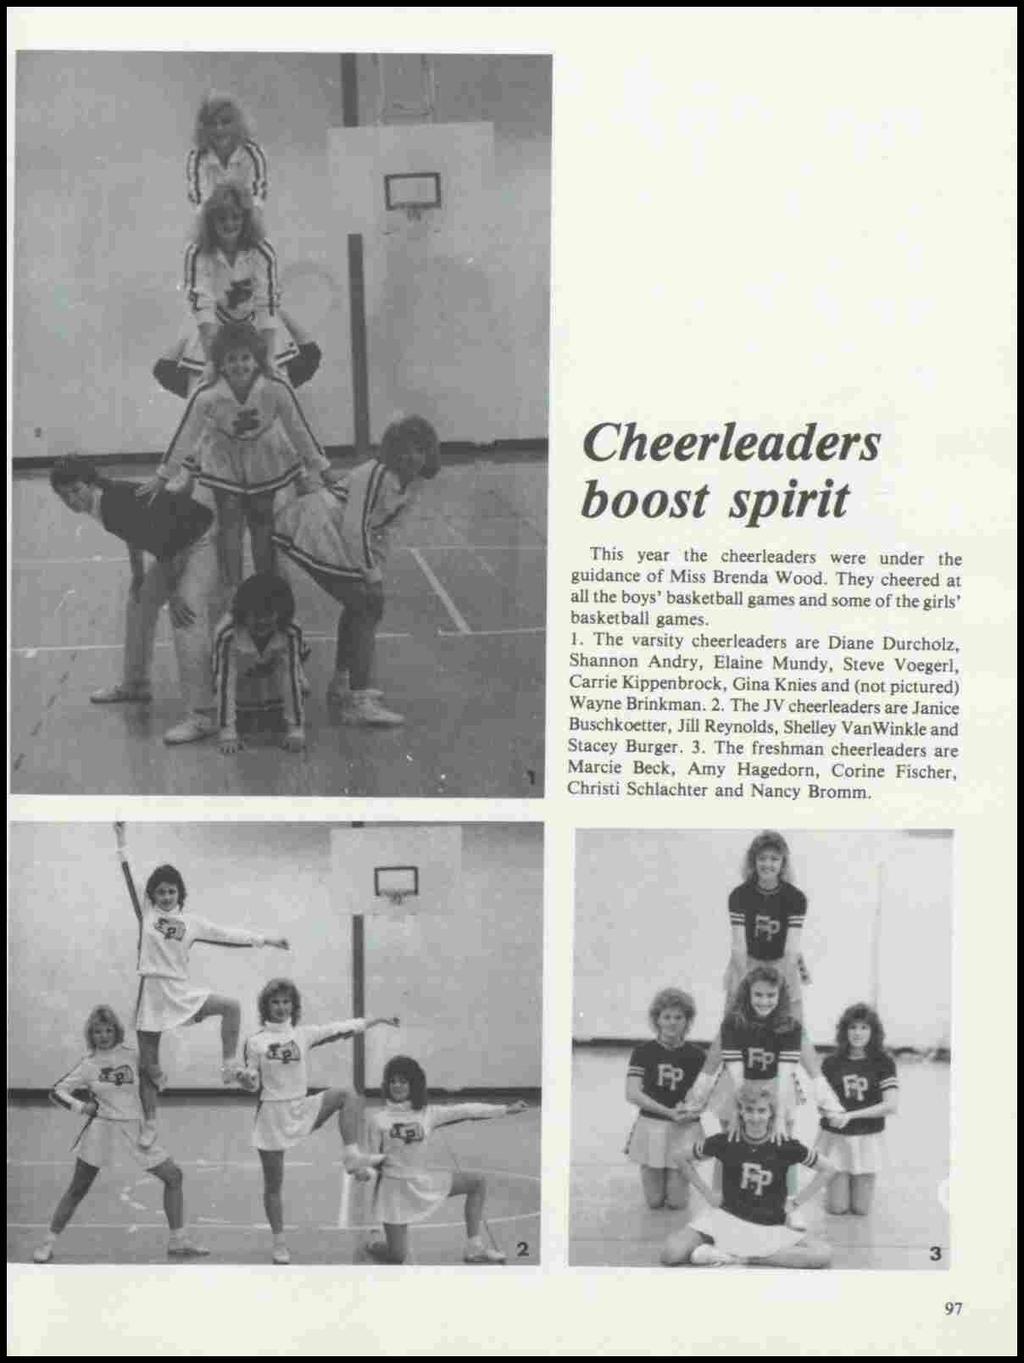 Cheerleaders boost spirit This year the cheerleaders were under the guidance of Miss Brenda Wood. They cheered at all the boys' basketball games and some of the girls' basketball games. 1.